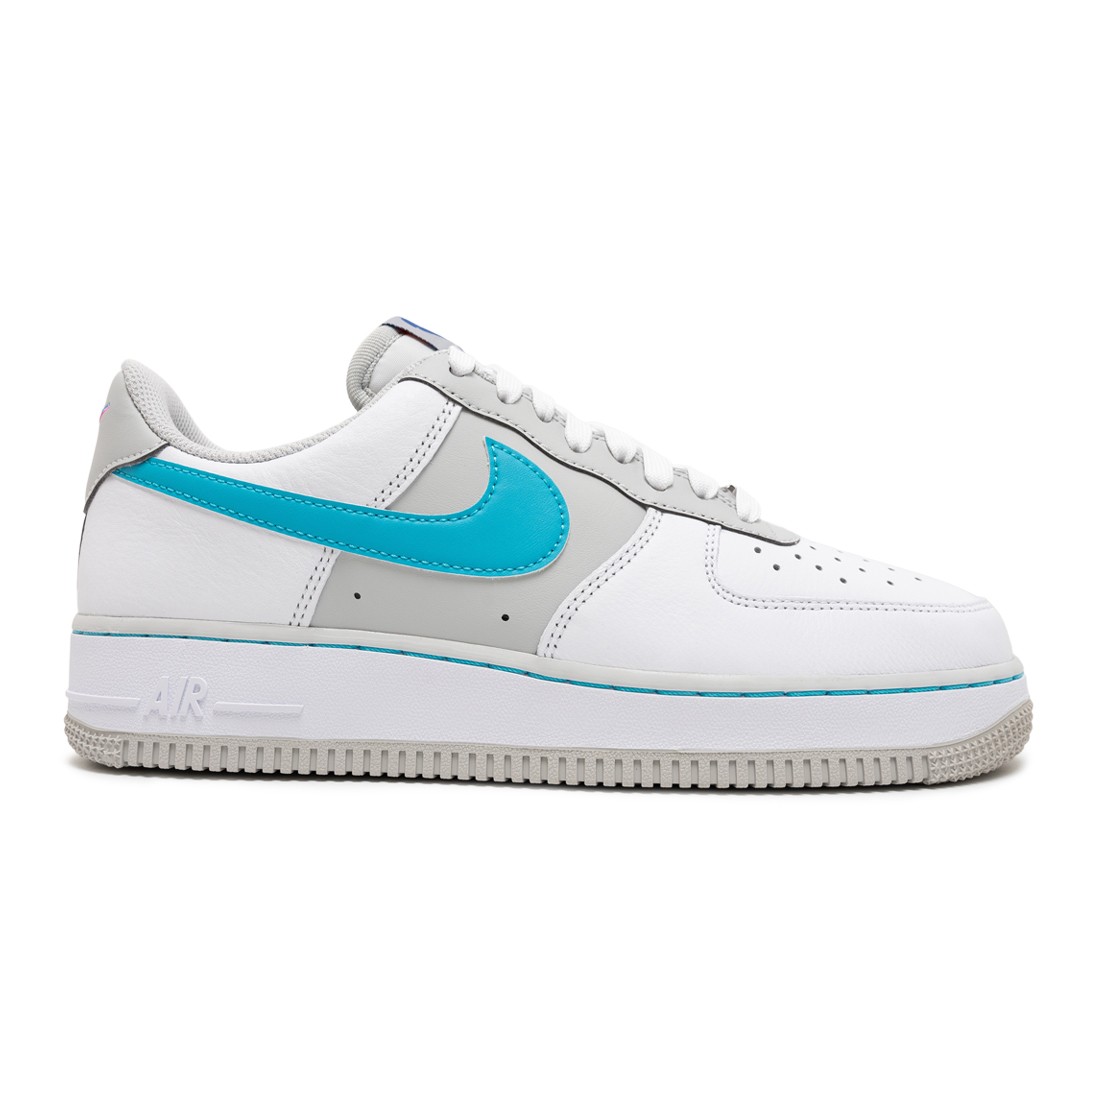 Nike Air Force 1 'Have A Nice Day' LV8 2 PS ( BQ8274-100 ) (11881